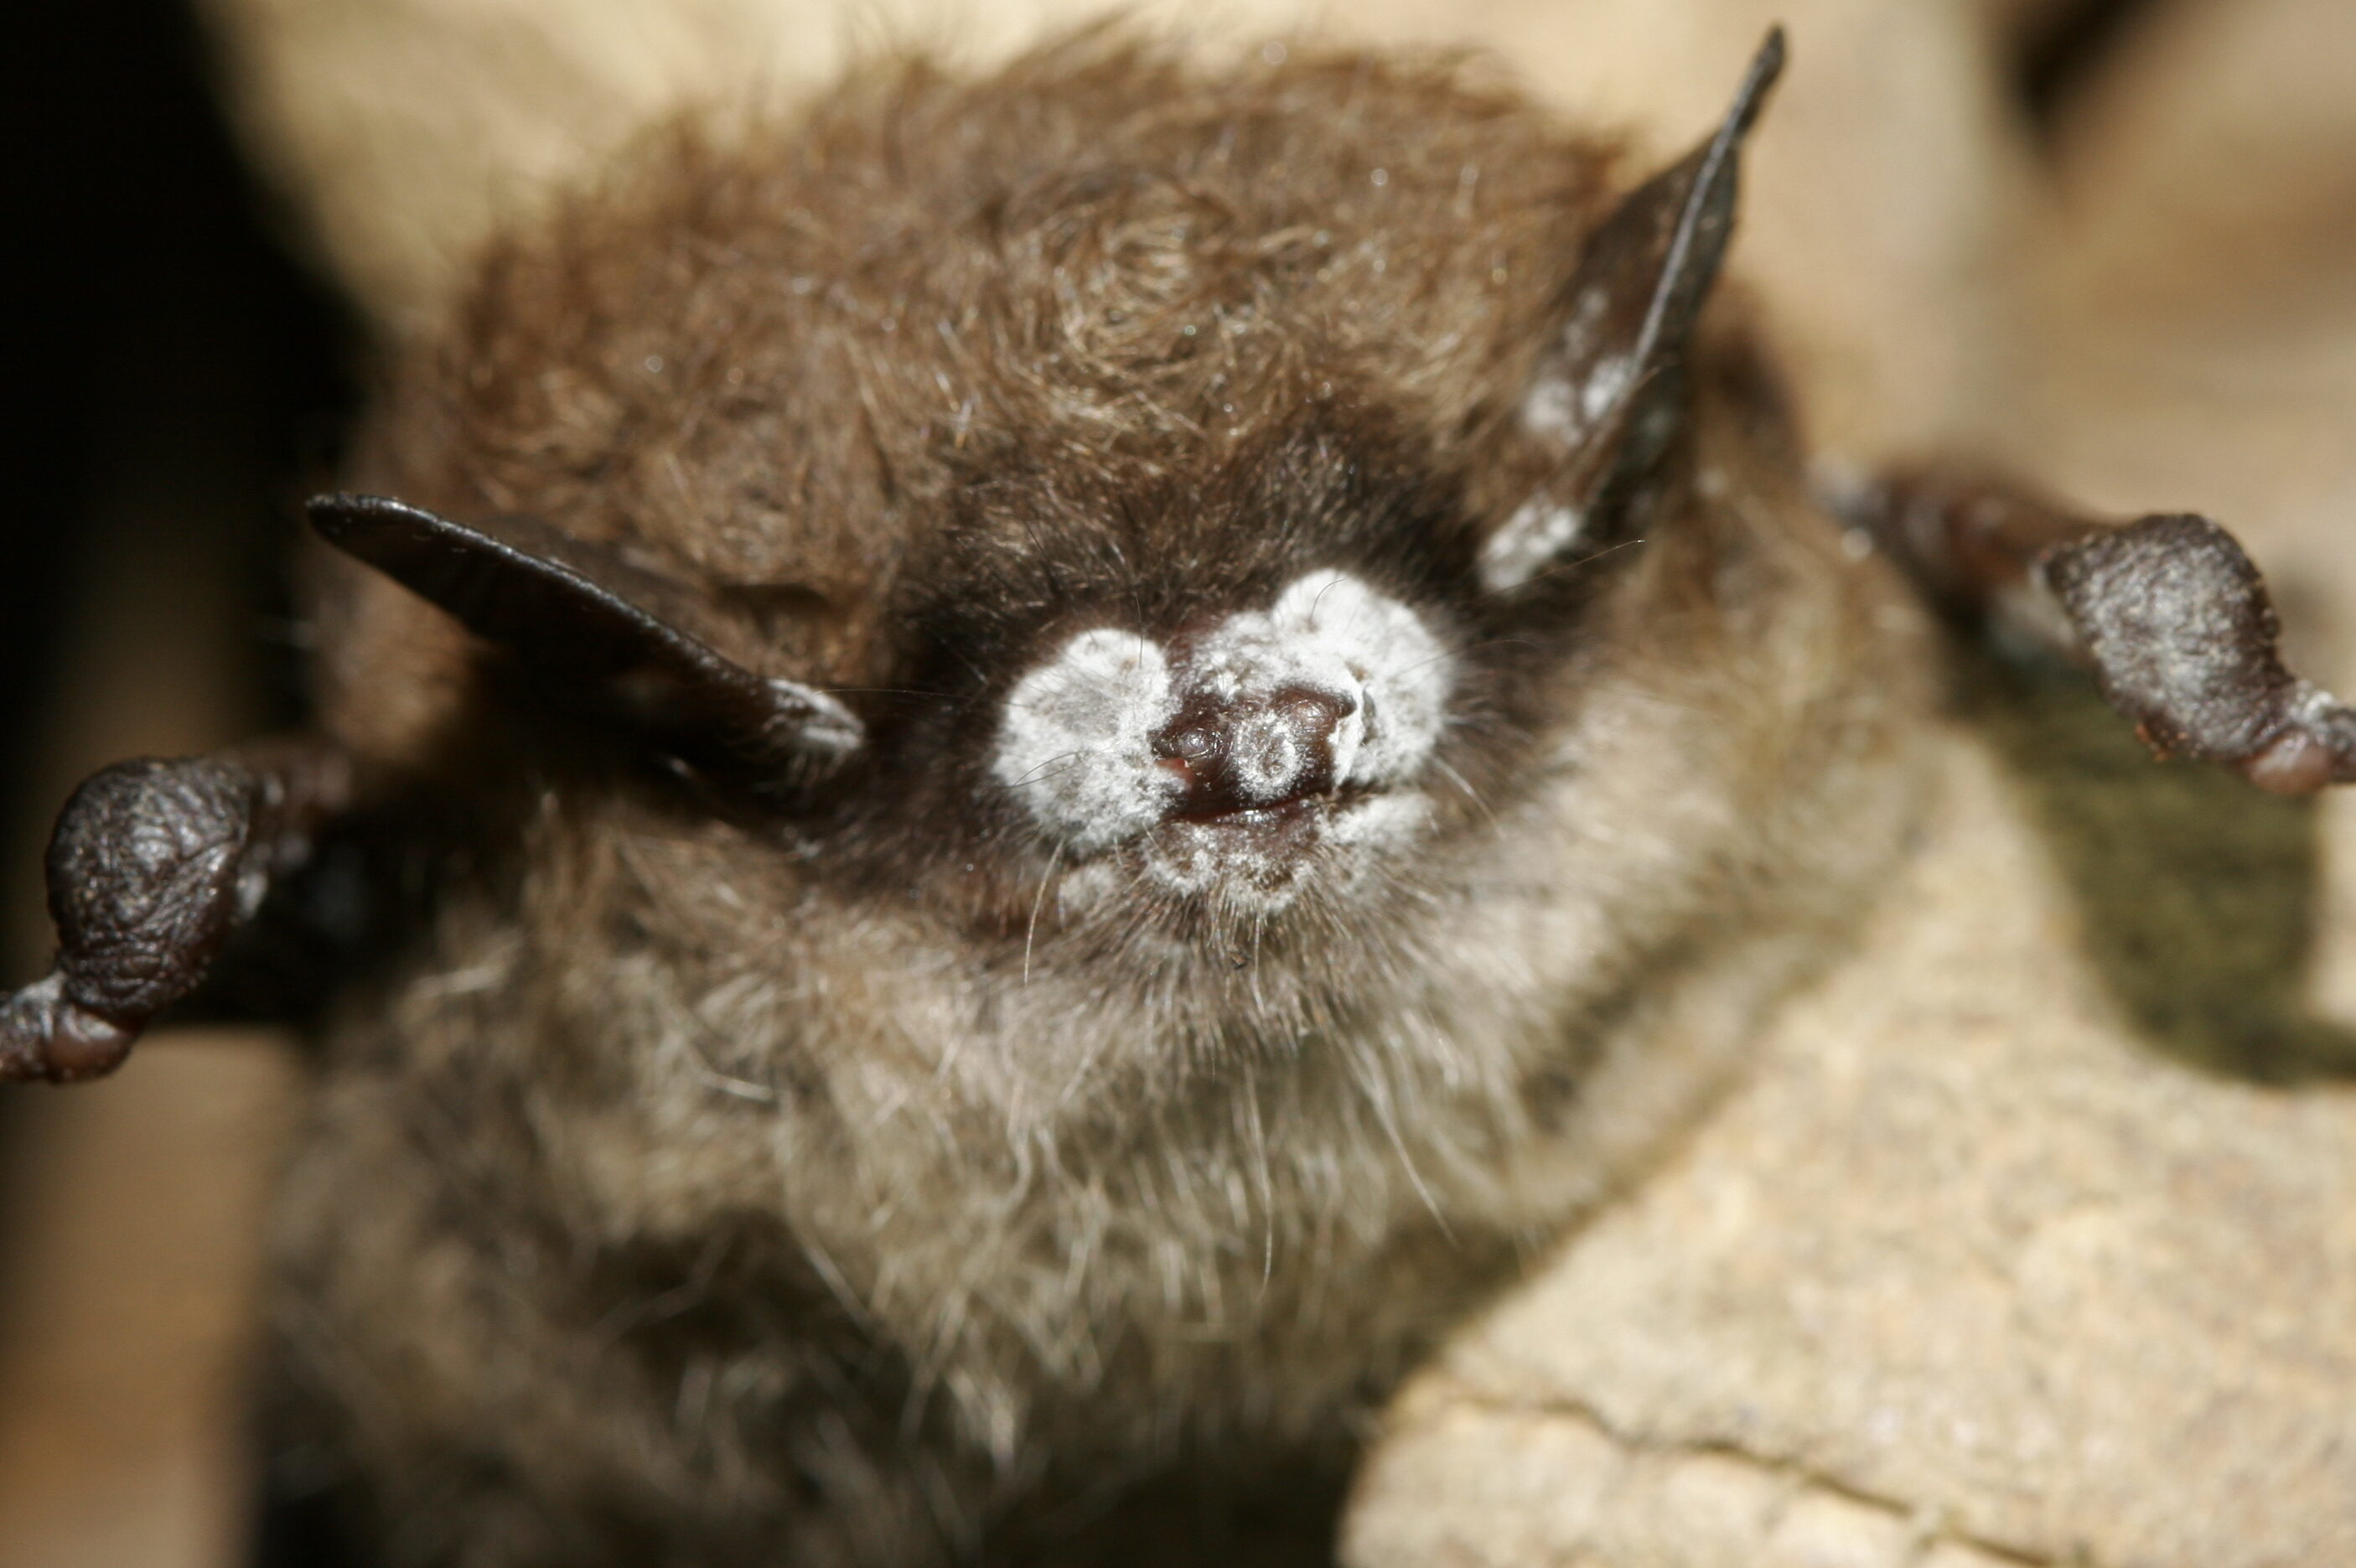 An image of white-nose fungus on a bat